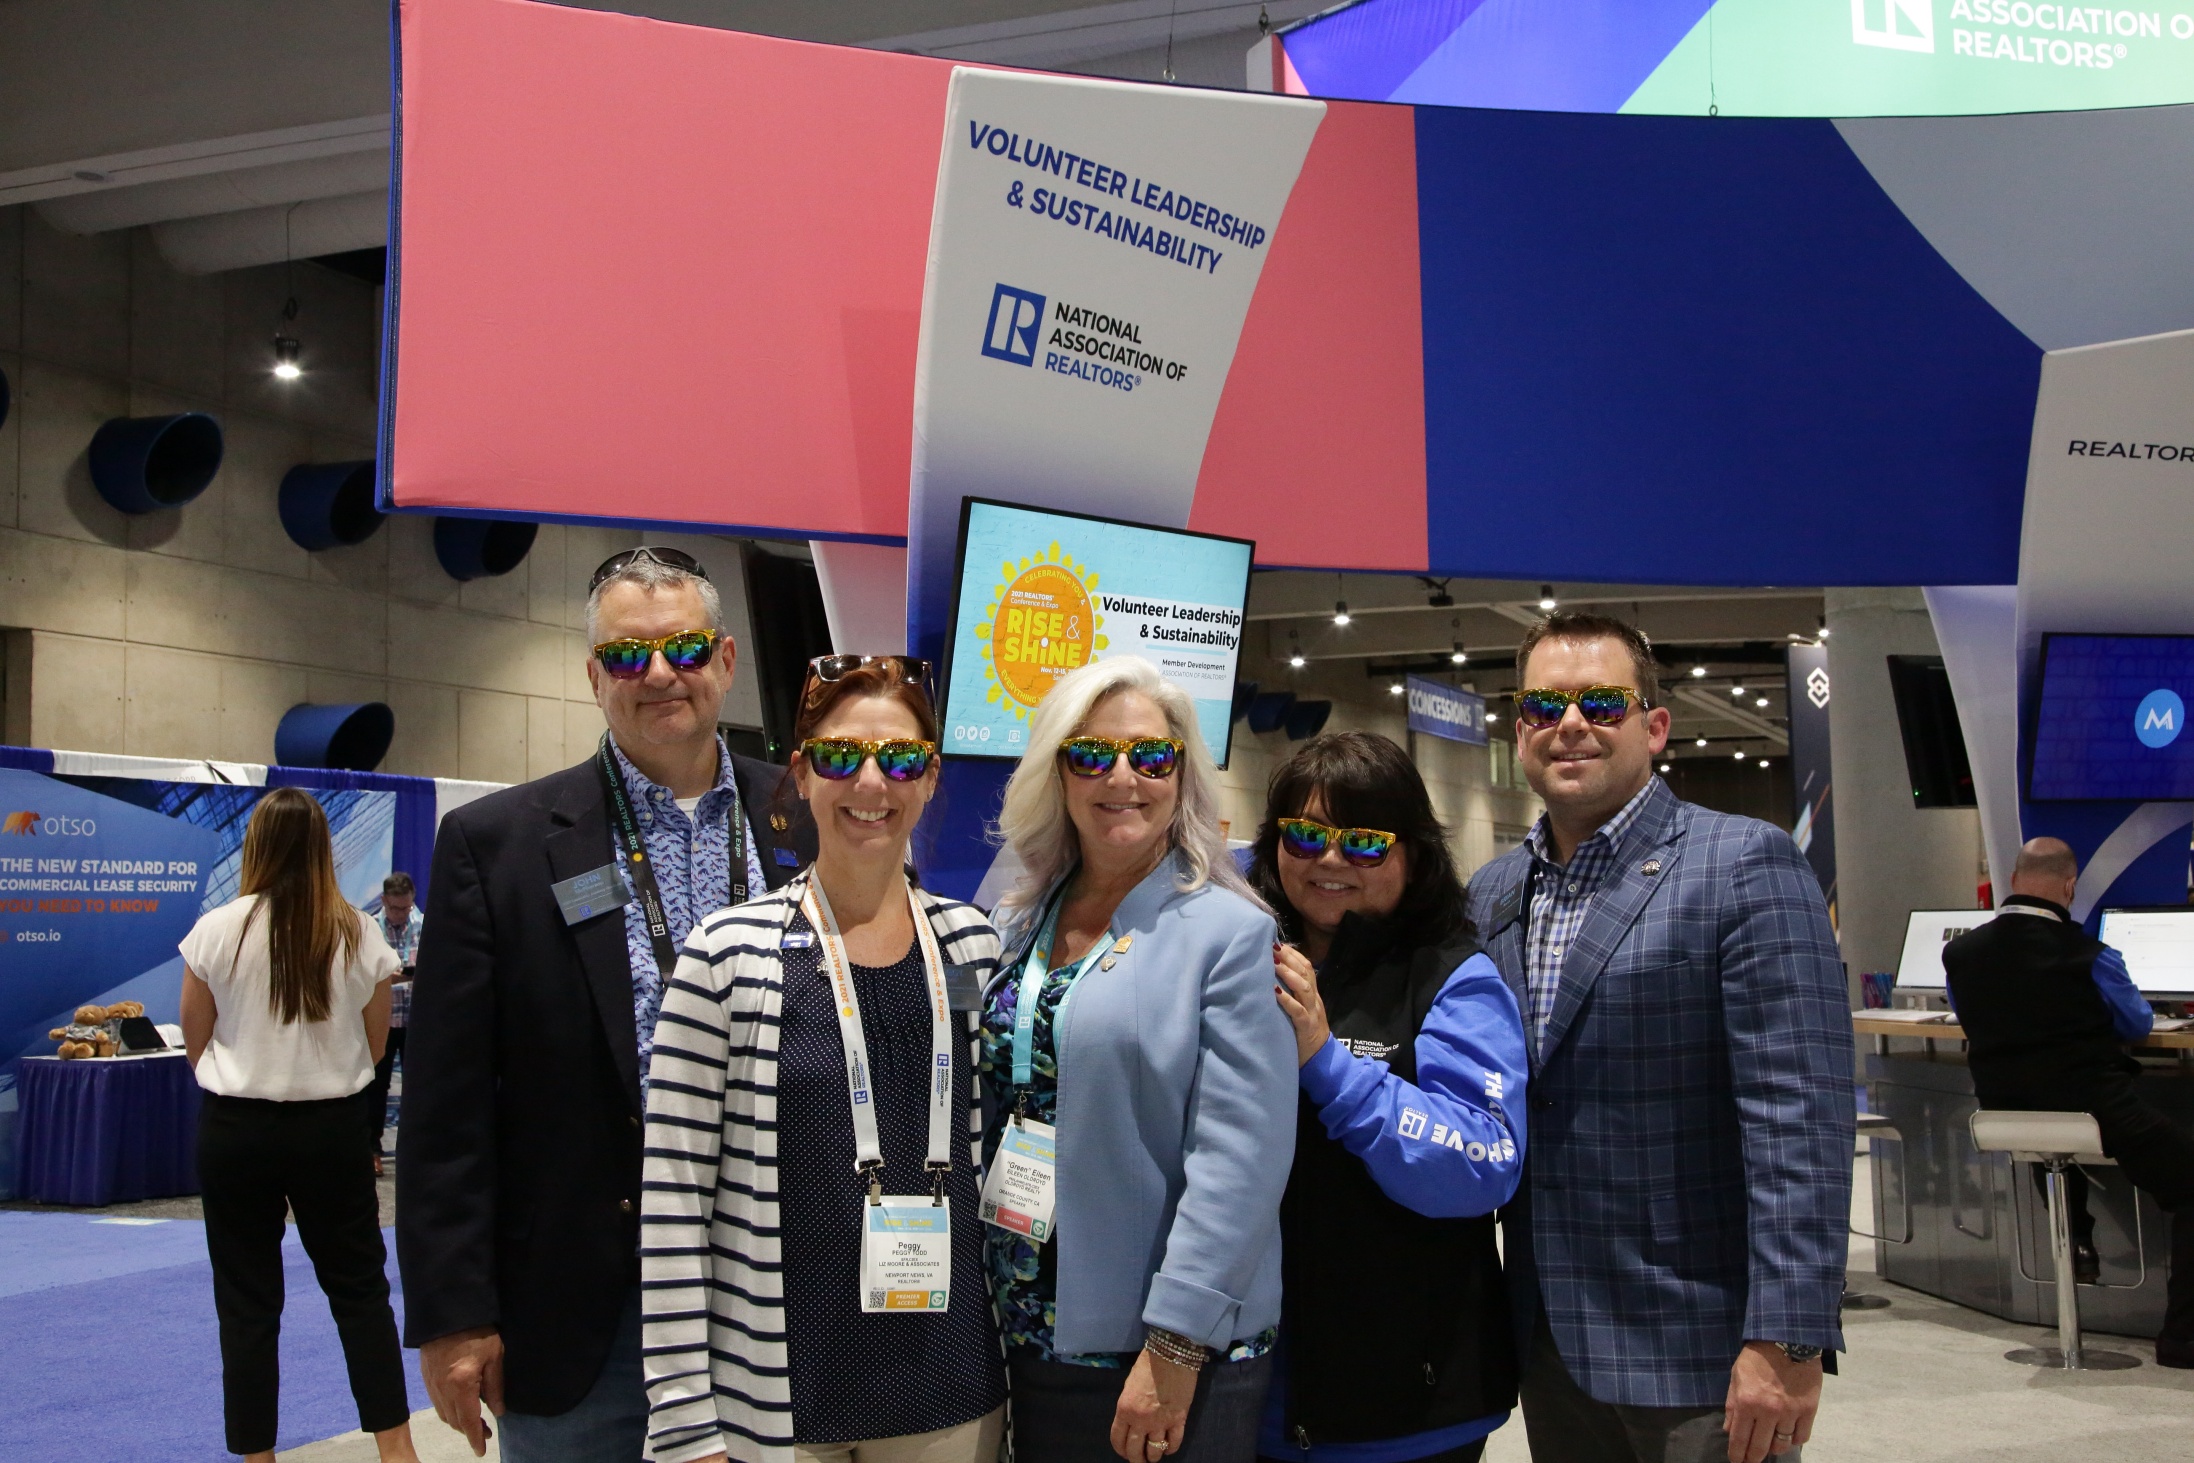 Members at the REALTORS® Conference & Expo 2021 in San Diego